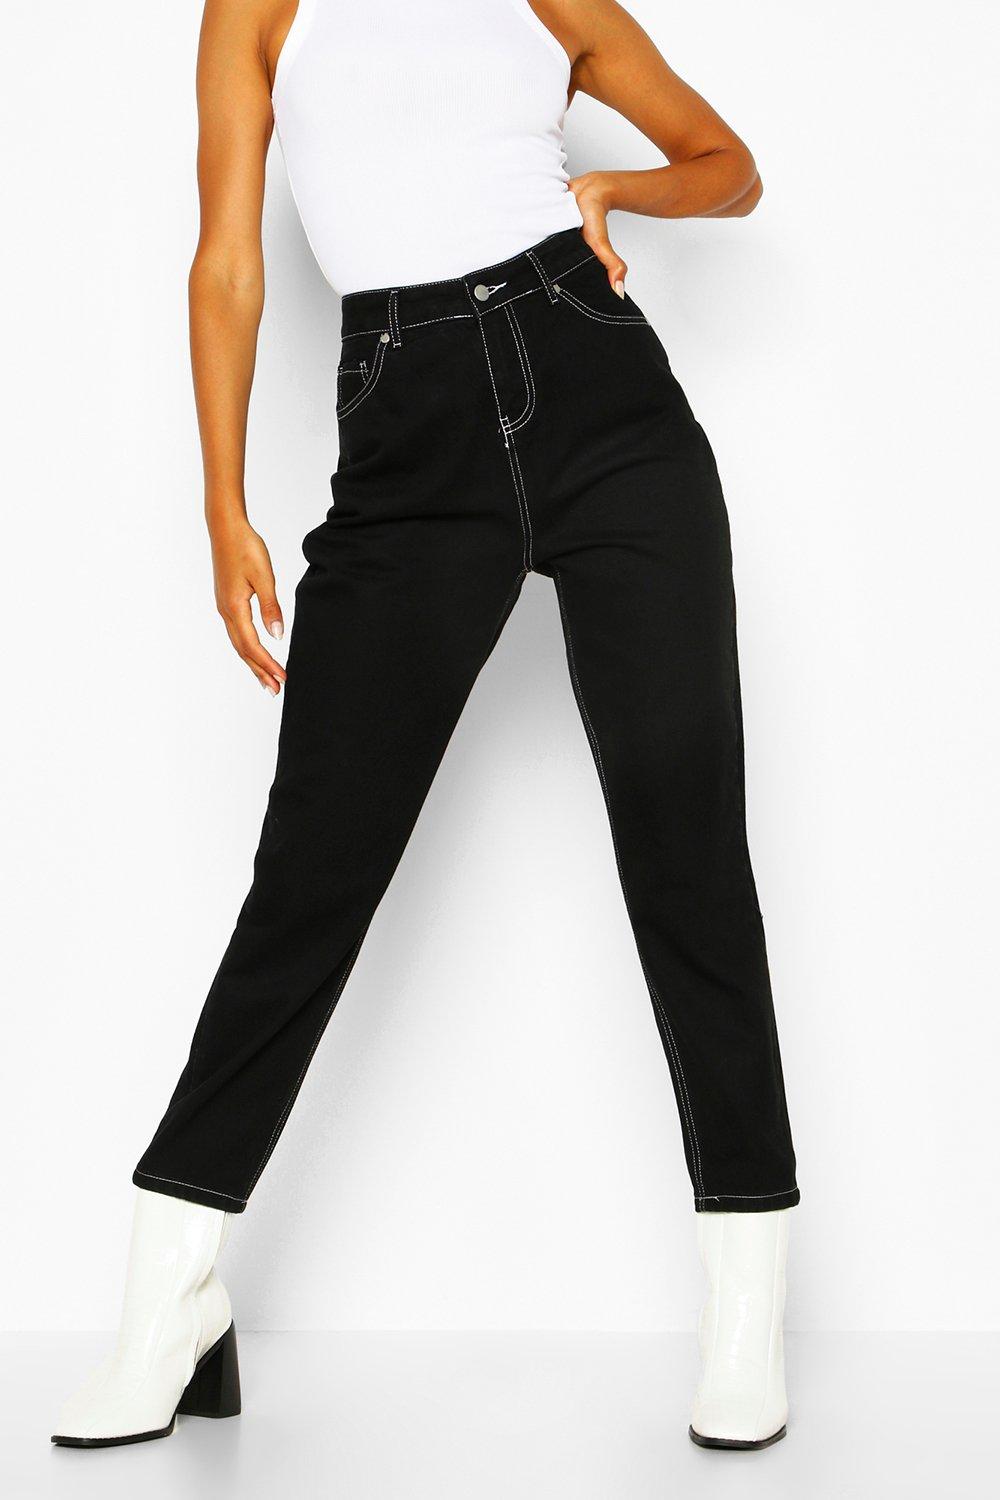 black jeans with contrast stitching